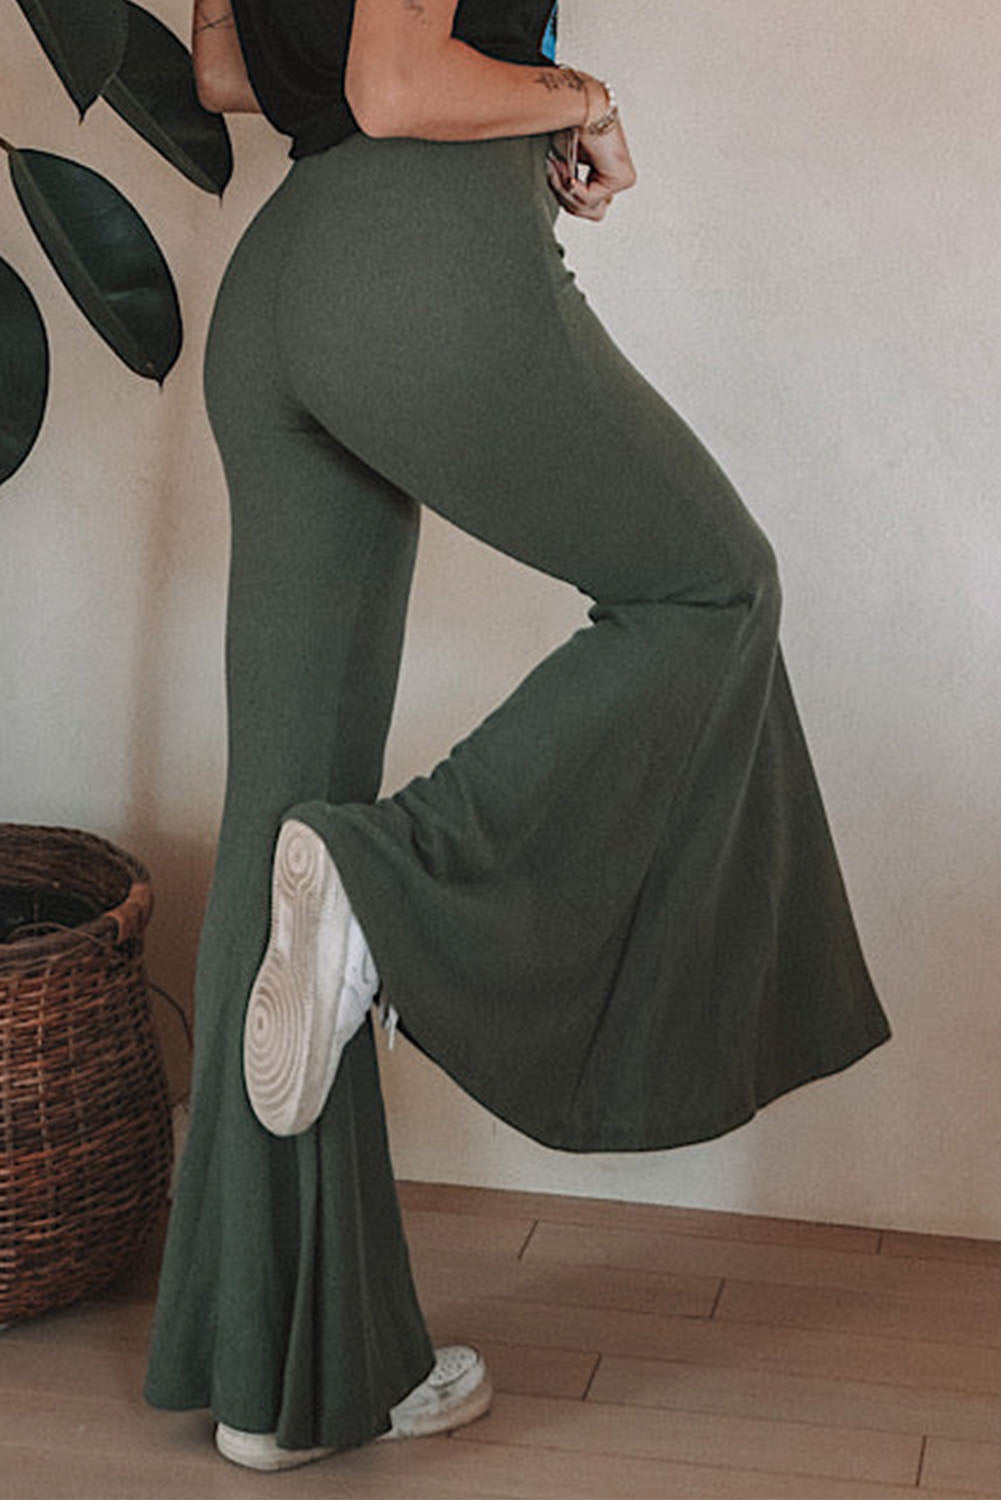 Gray Solid Color High Waist Ribbed Flare Pants 